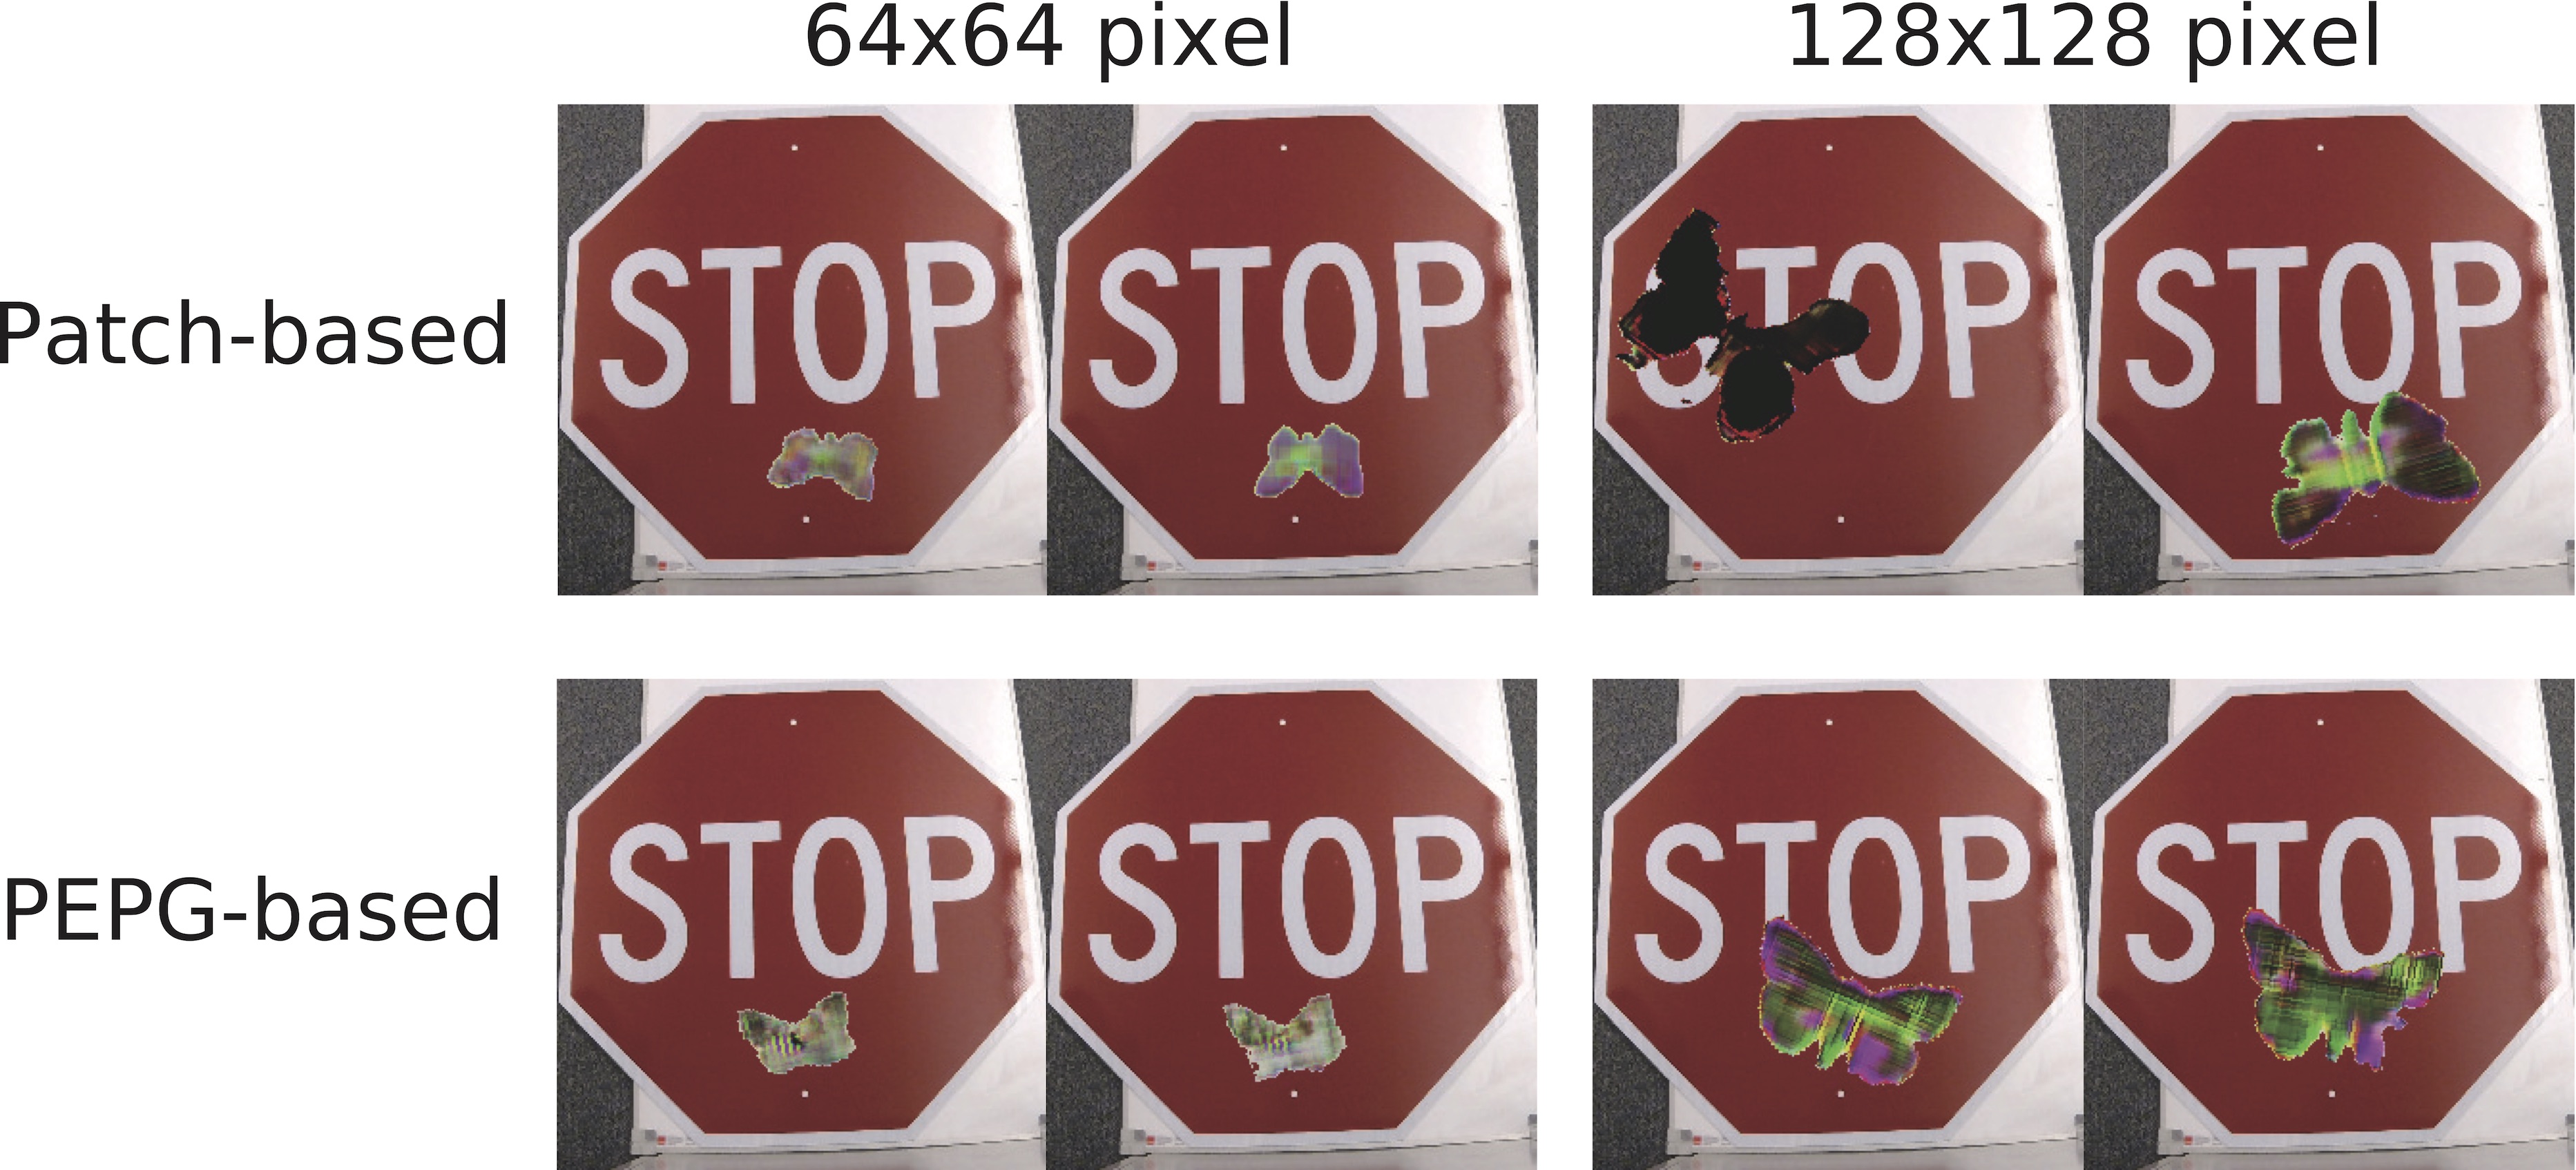 Examples of adversarial examples that made the road sign classifier recognize them as "Speed Limit 80."